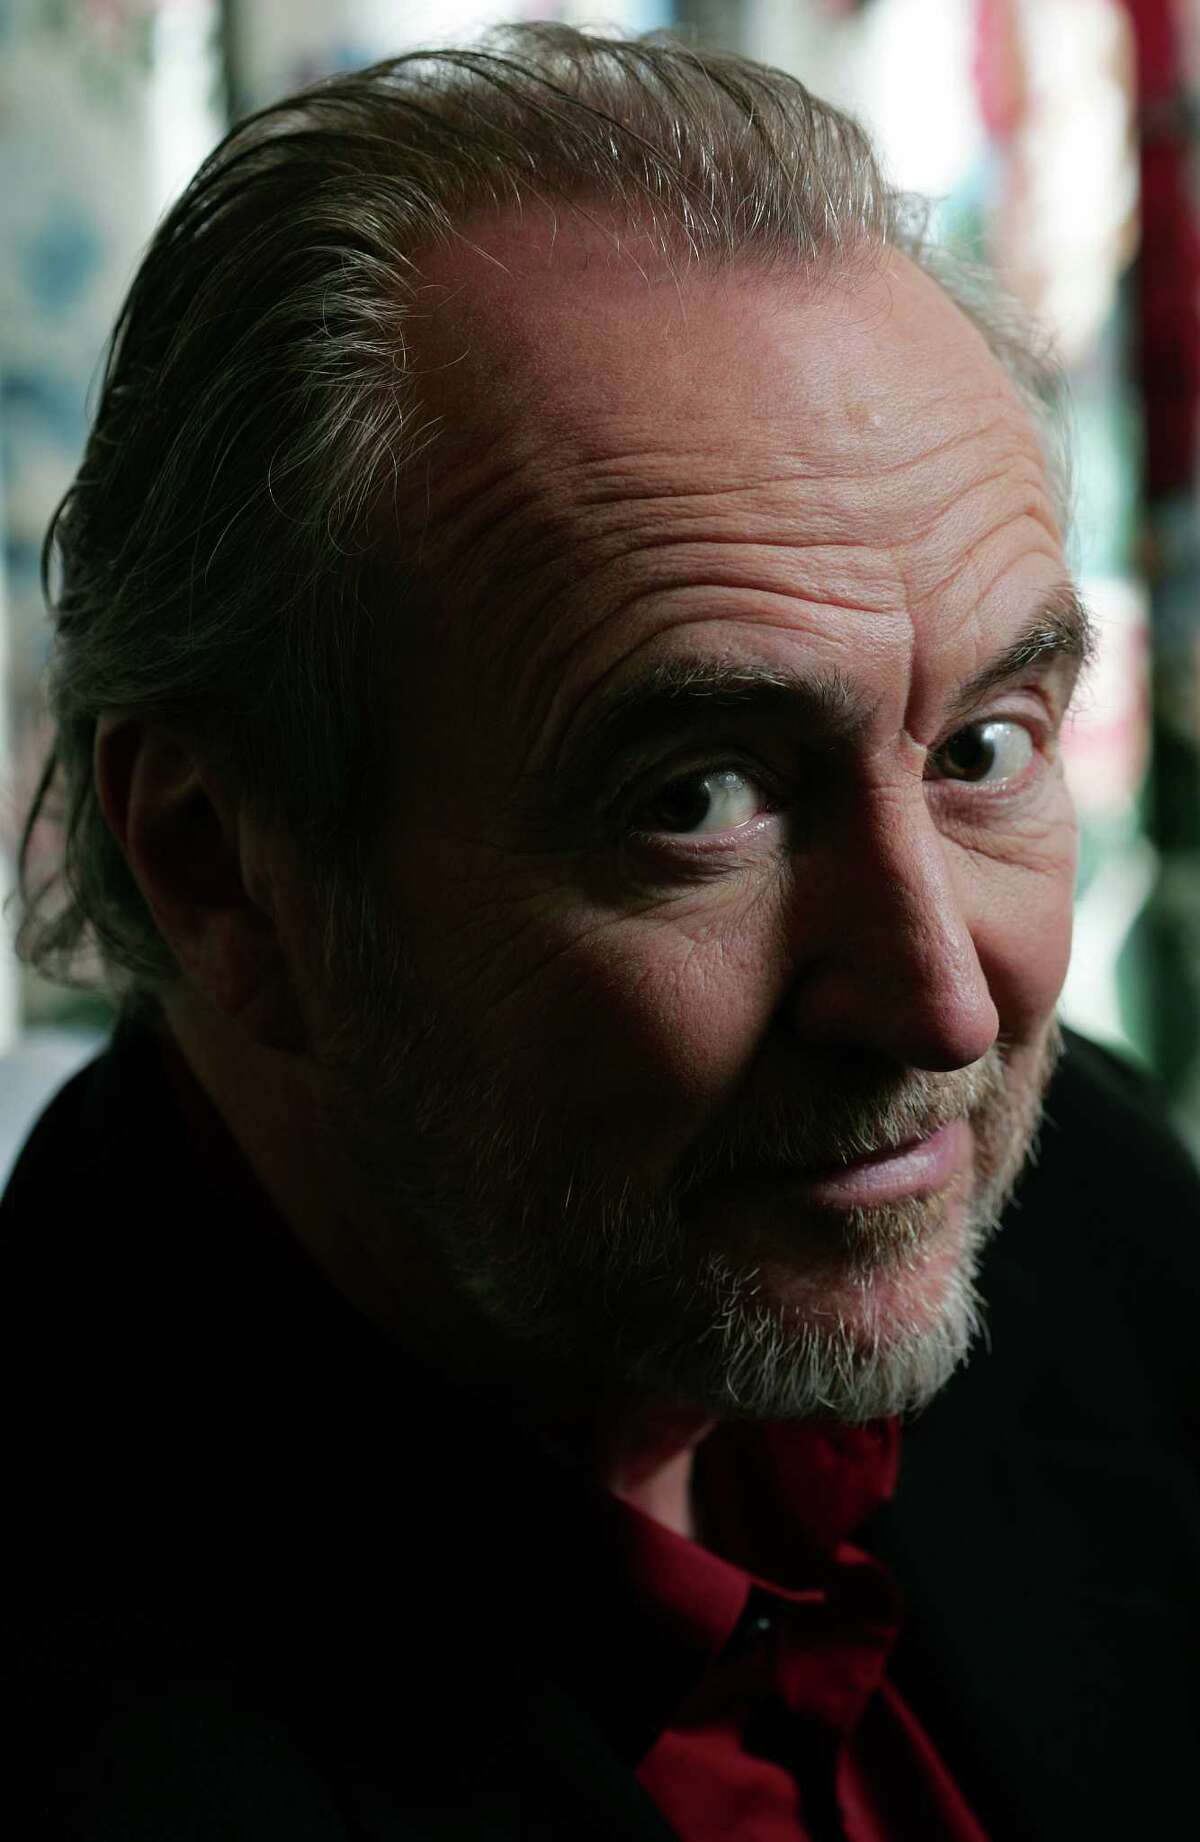 Master of the modern horror film Wes Craven died at age 76 after a long fight with brain cancer. Here is a look at some of his best hits.